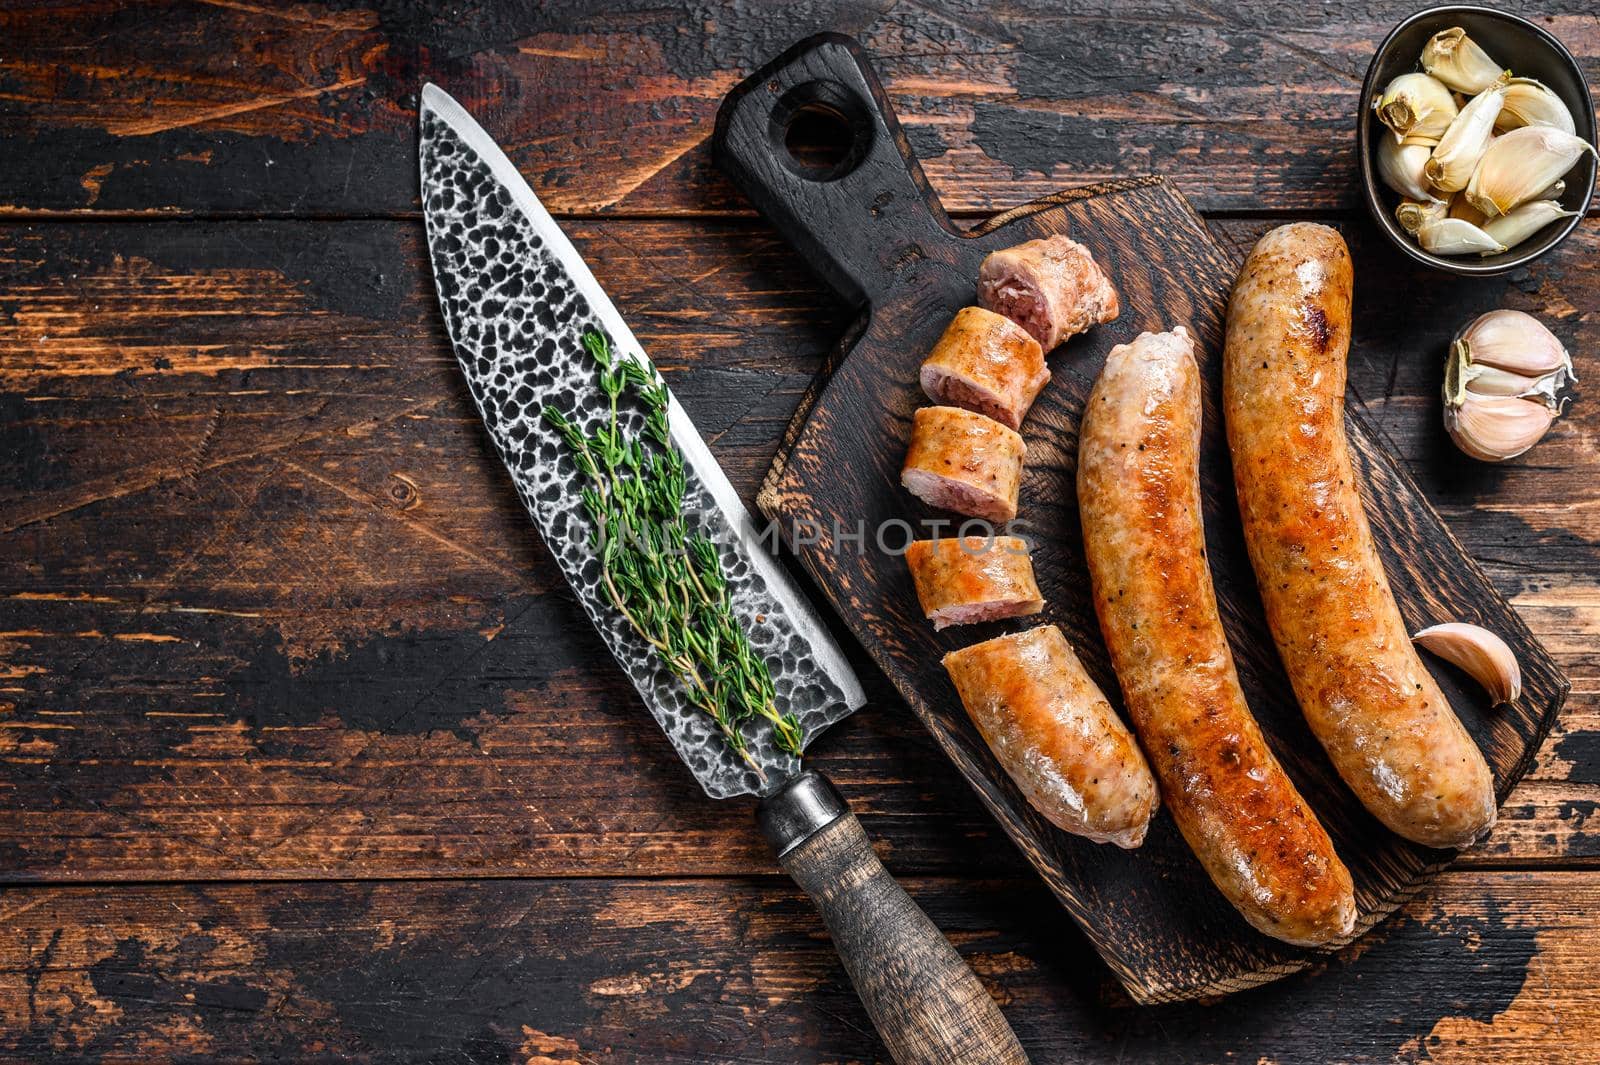 Fried and sliced pork Sausage with herbs. Top view. Dark wooden background. Copy space.